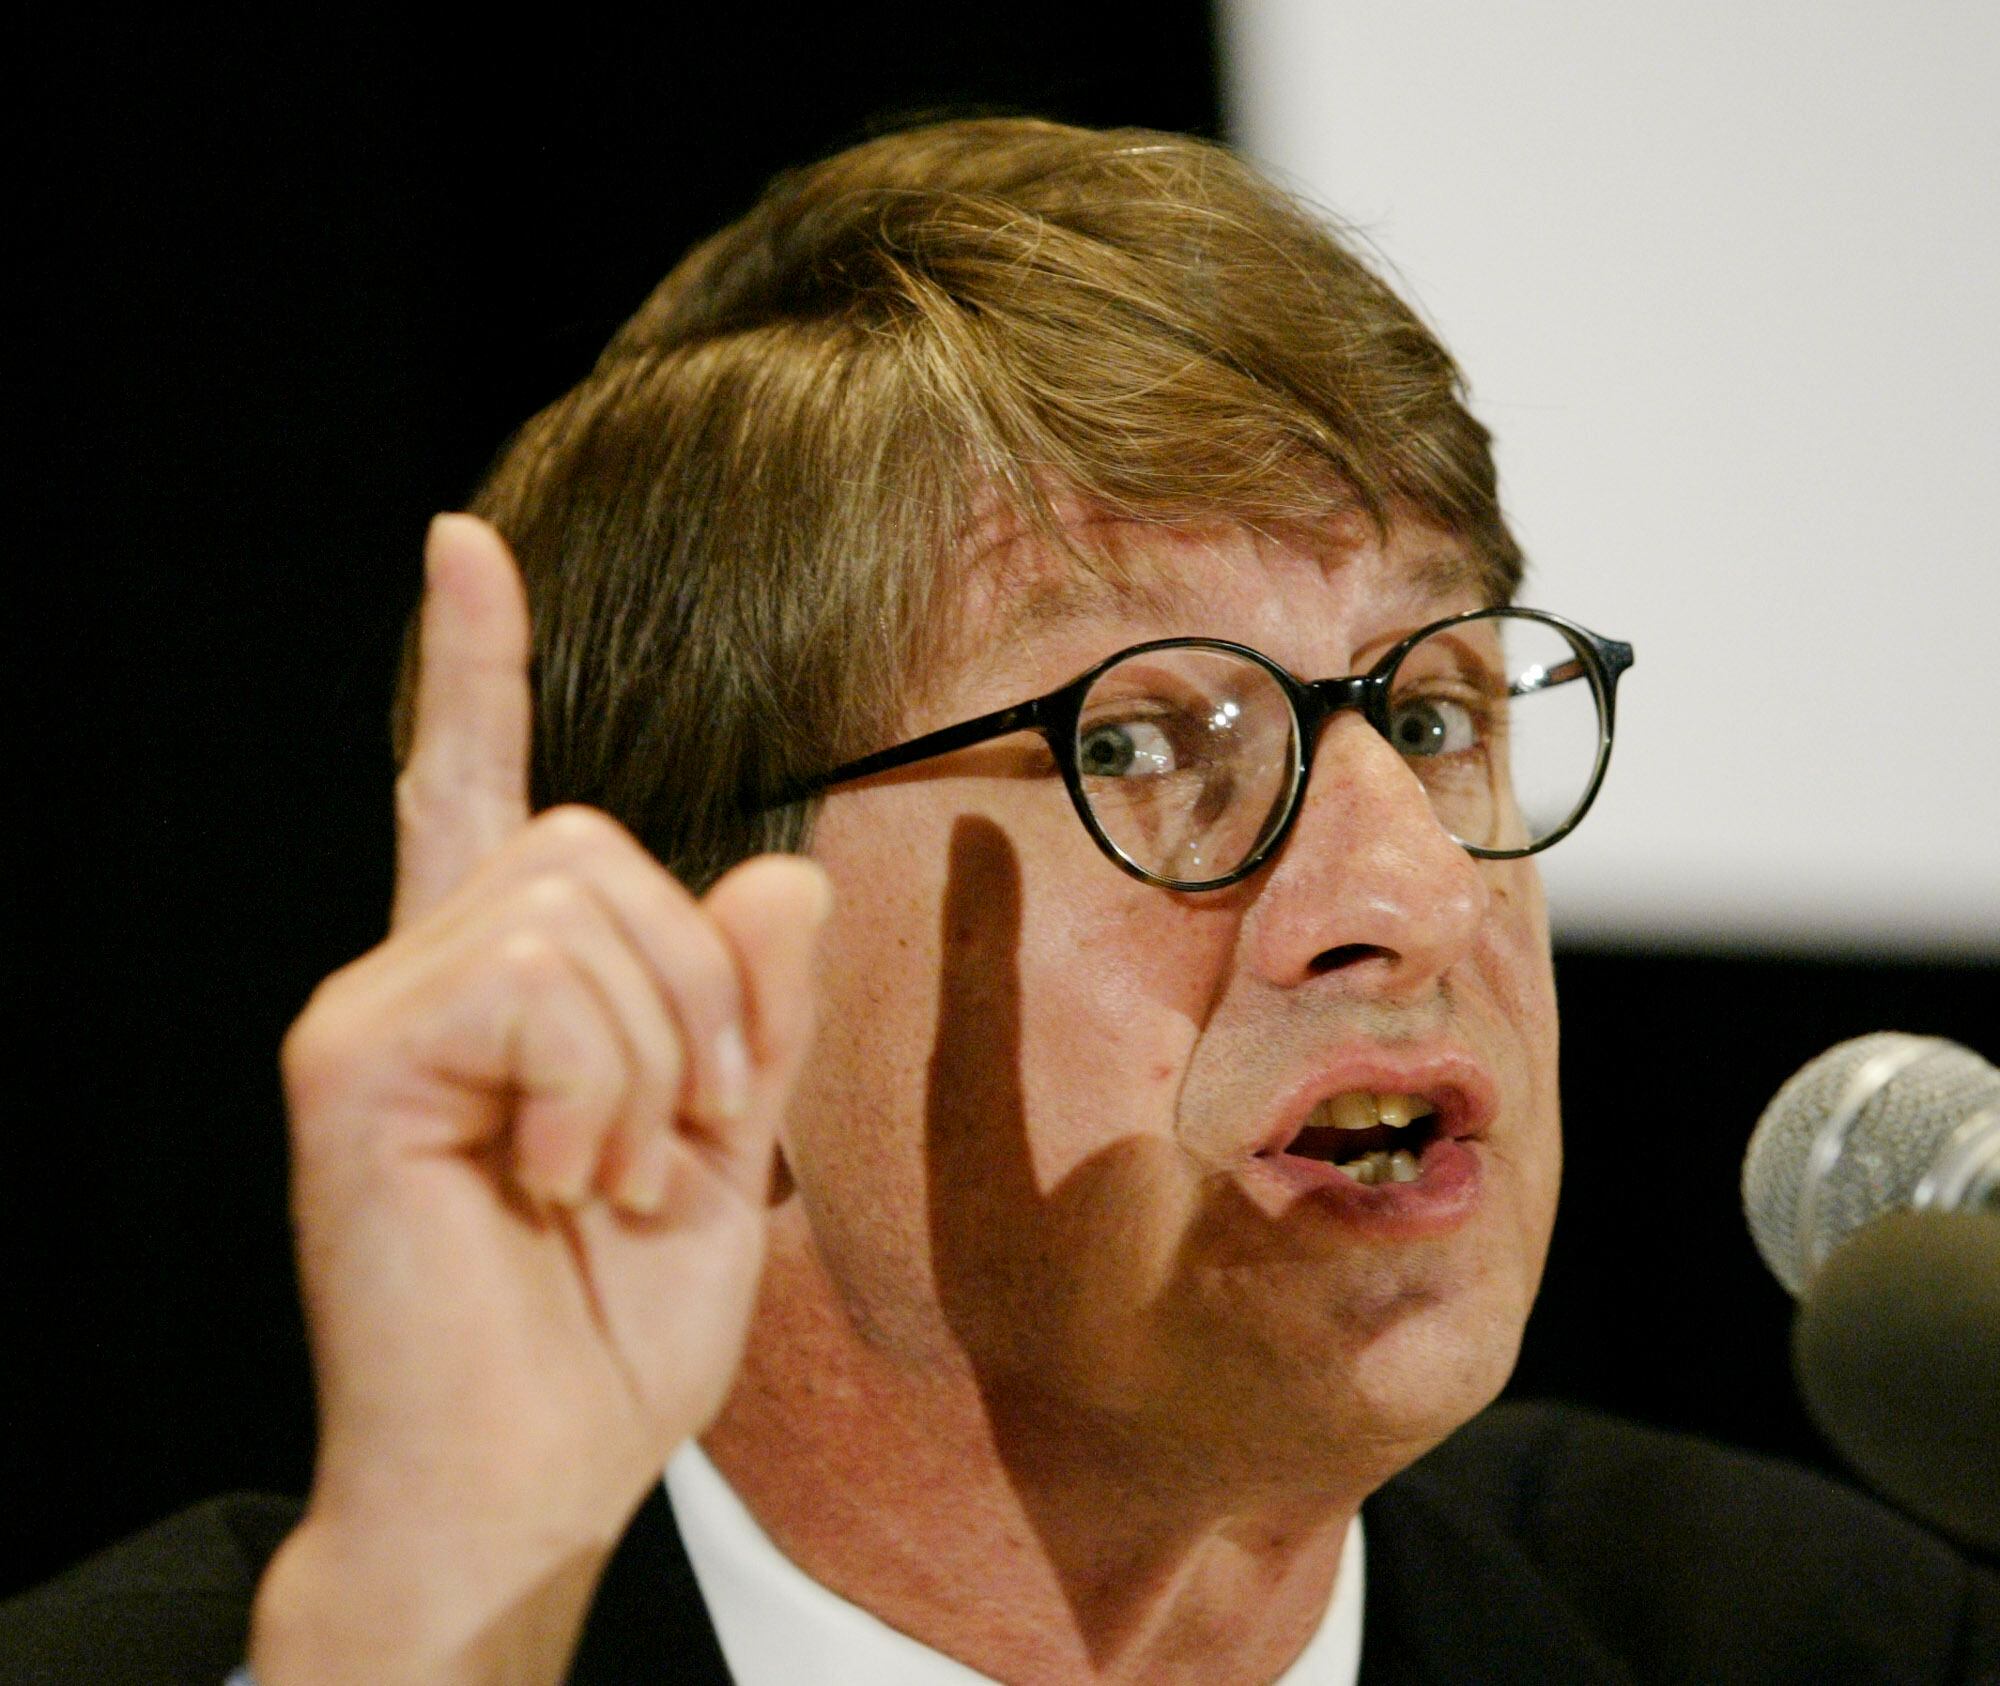 P.J. O’Rourke, irreverent author and commentator, dead at 74